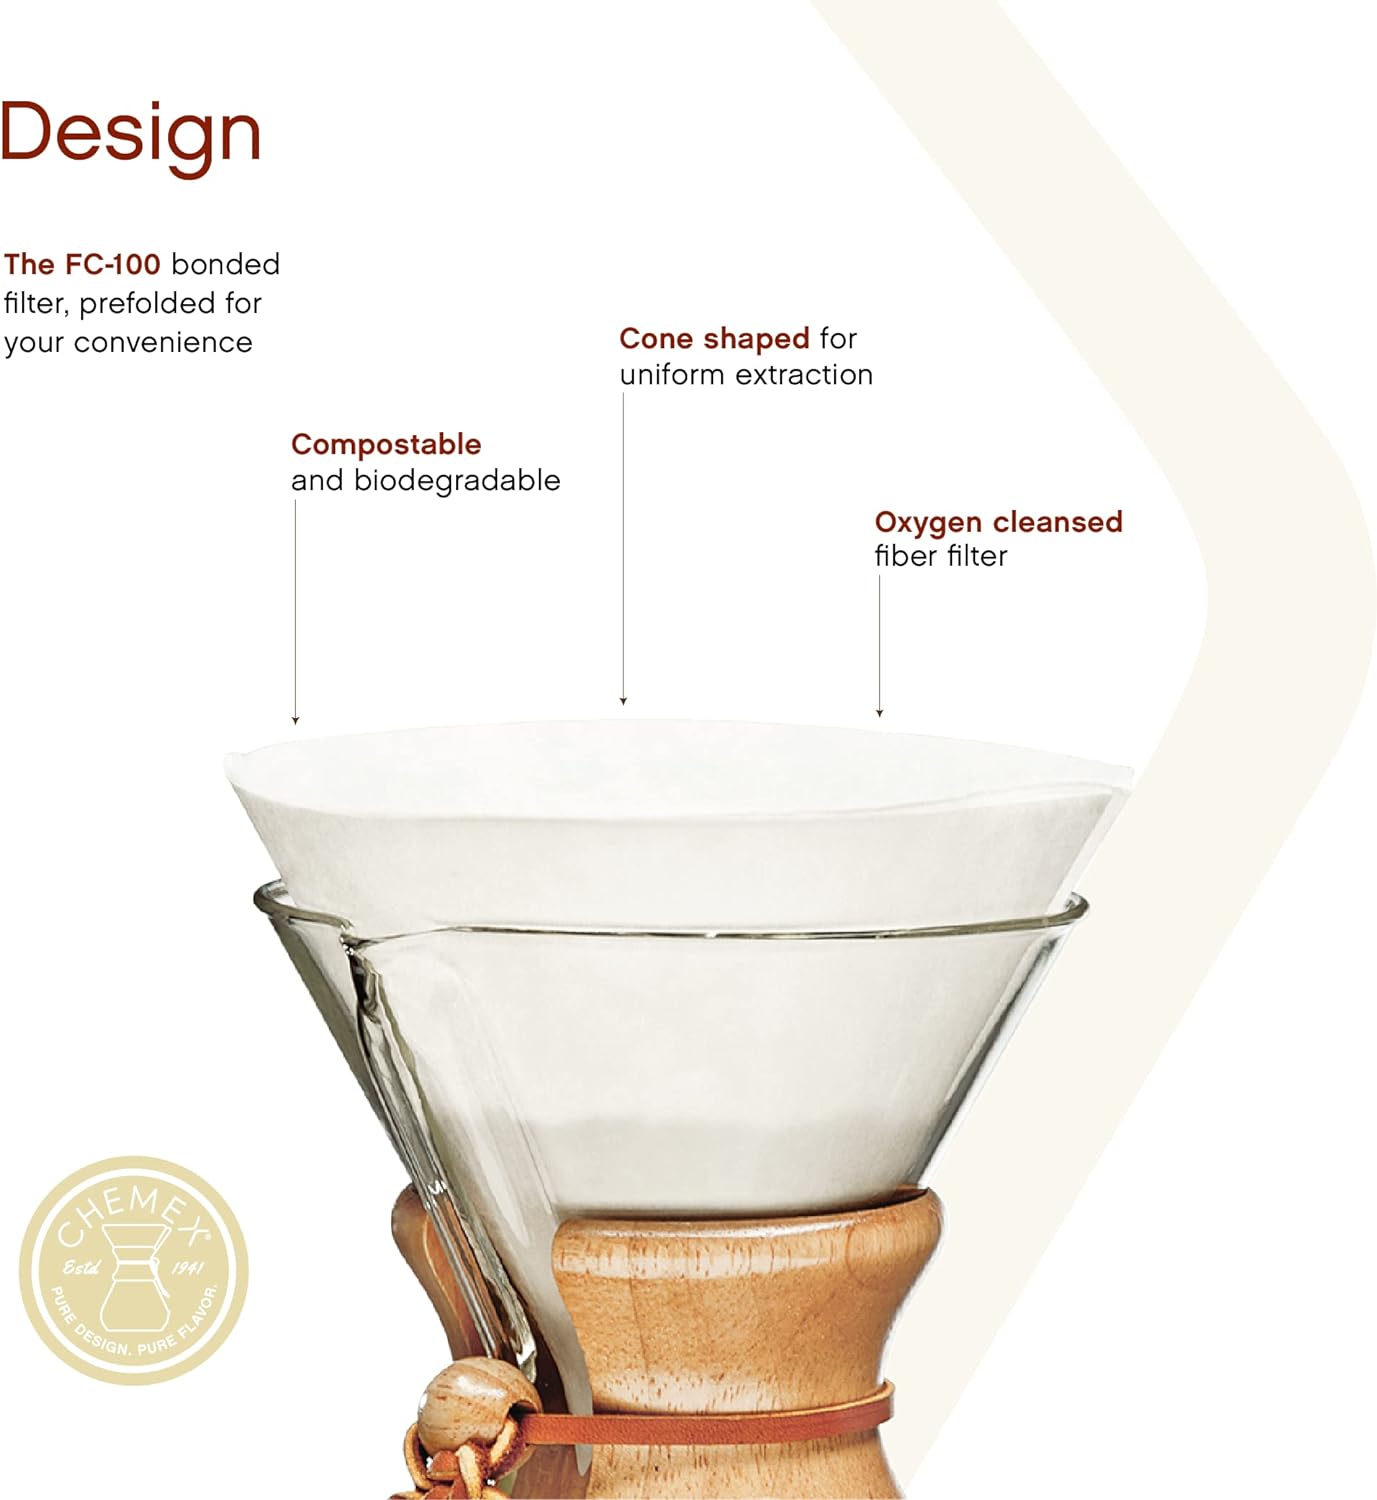 Chemex Coffee Maker Chemex Classic Coffee Filters, Squares, 100 ct - Exclusive Packaging